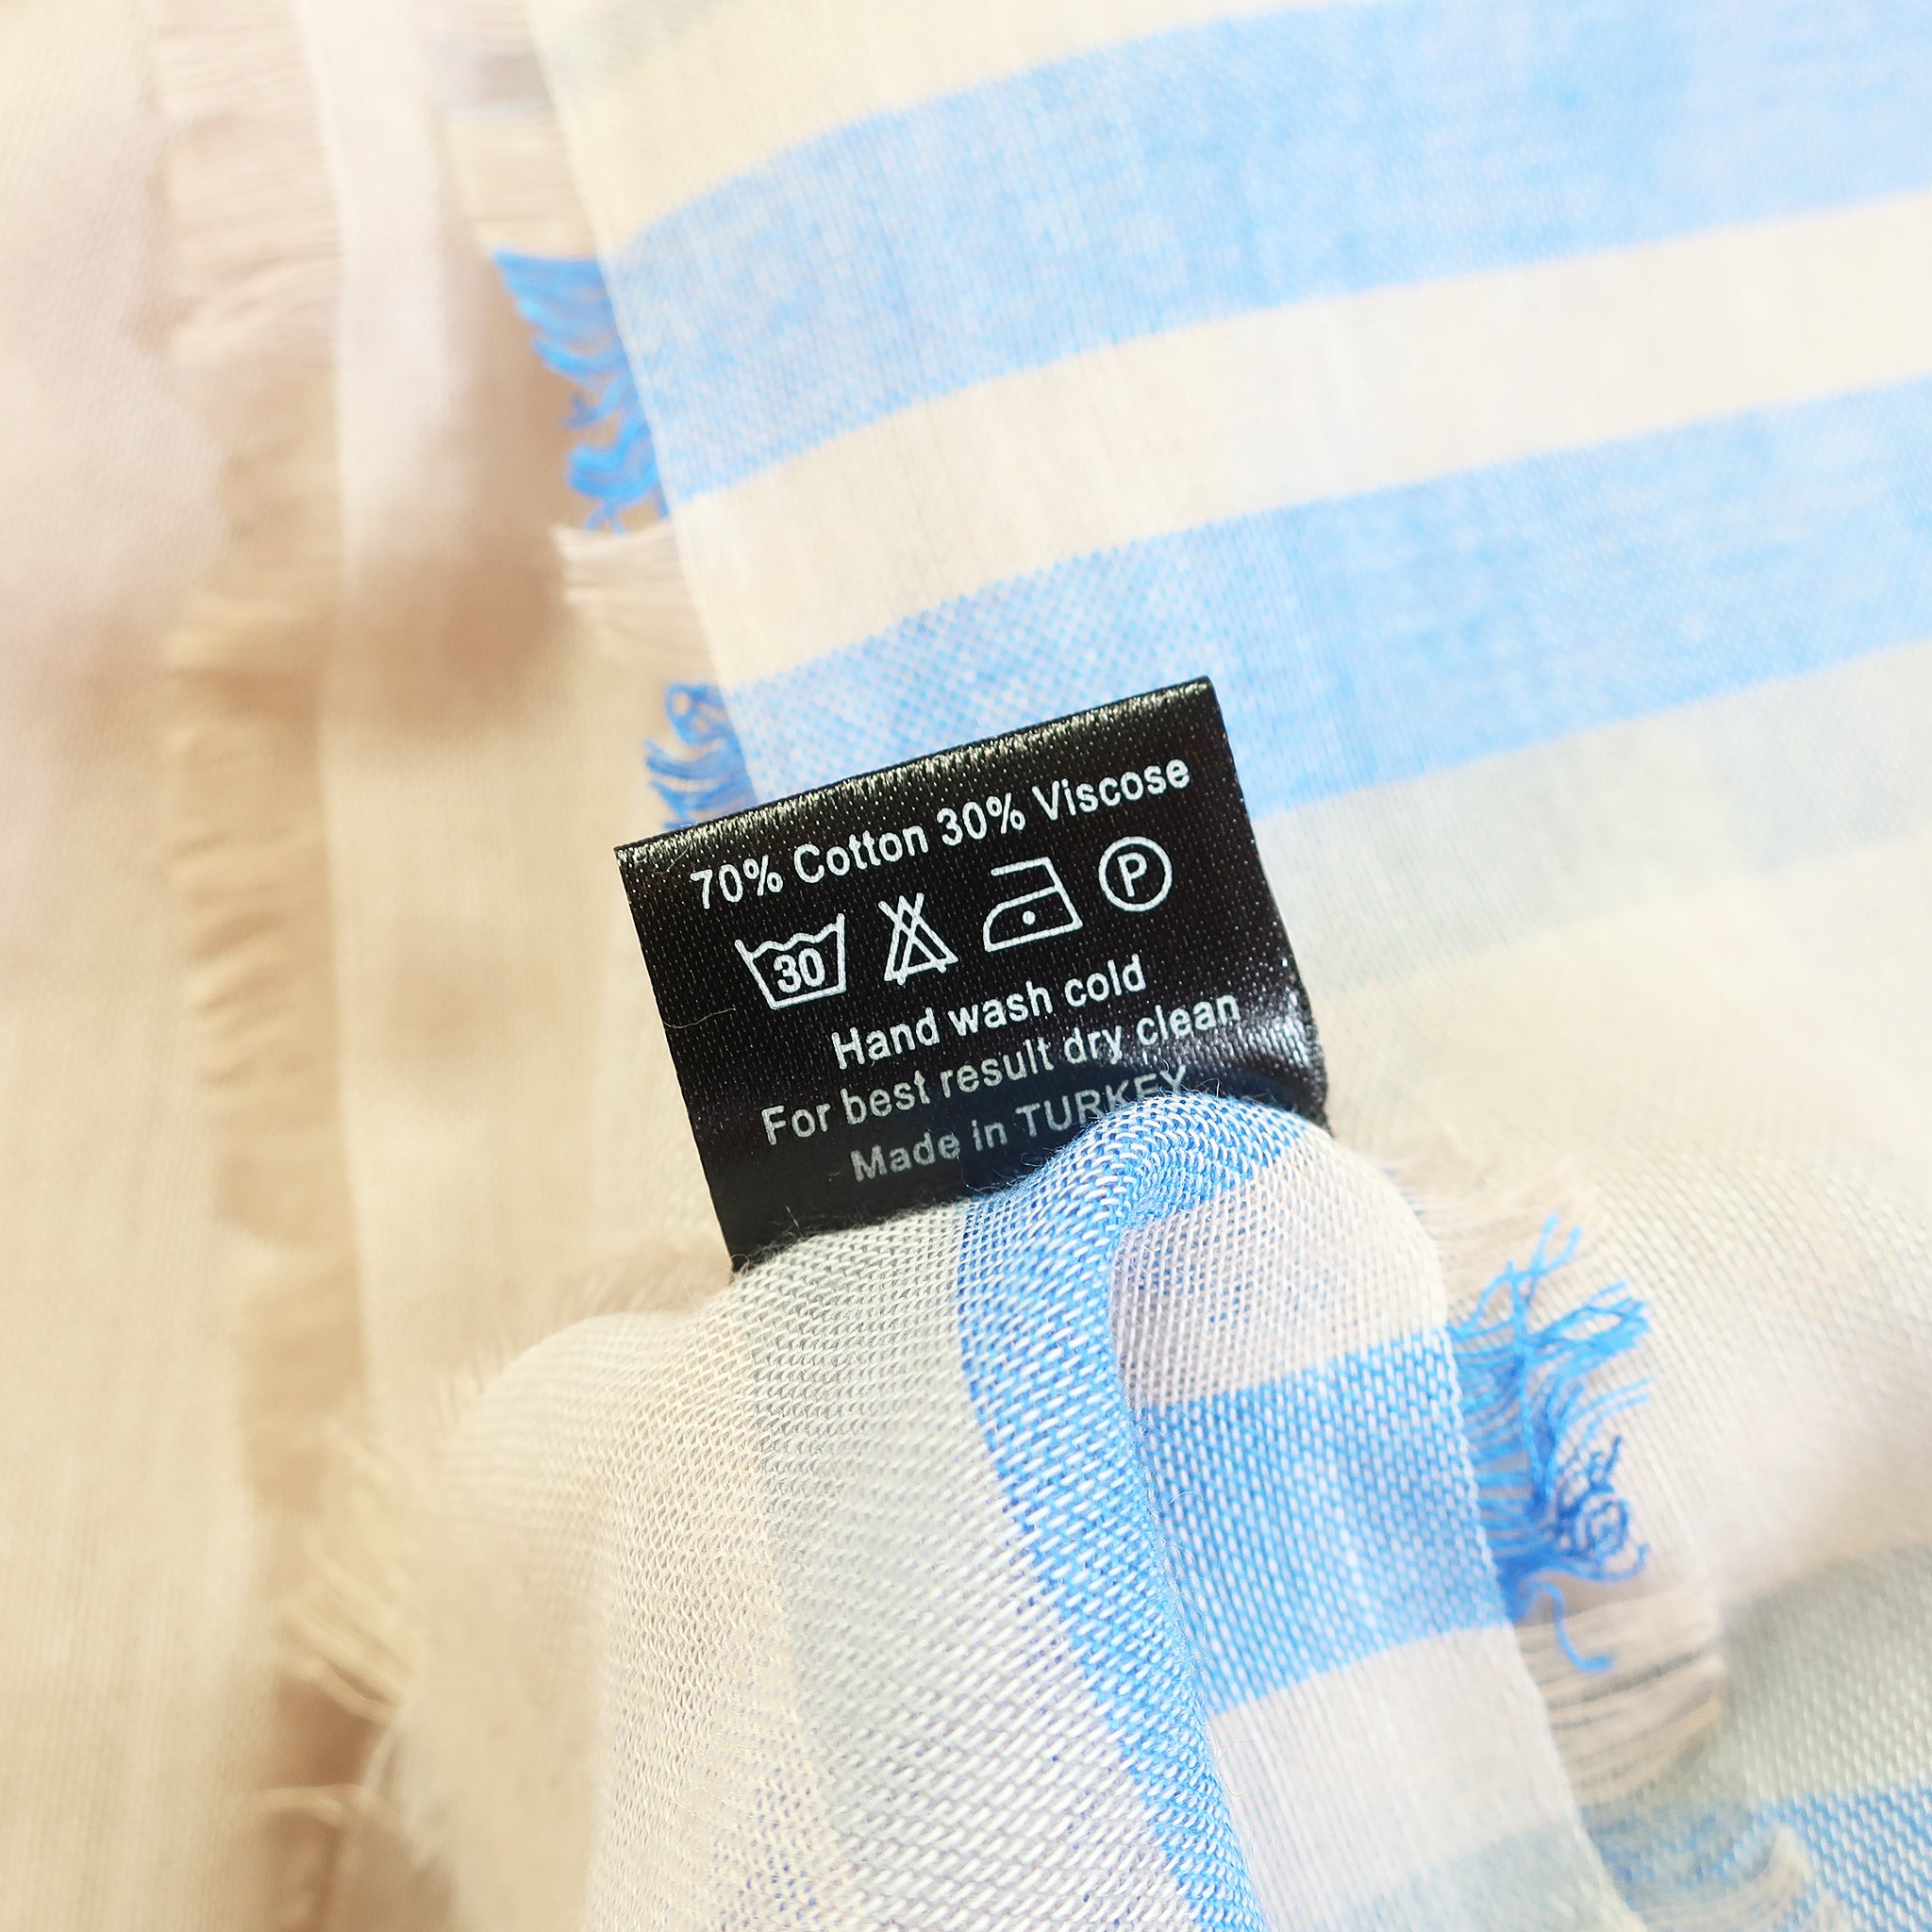 Blue Pacific Turkish Cotton Stripe Scarf in Wedgewood and Sand